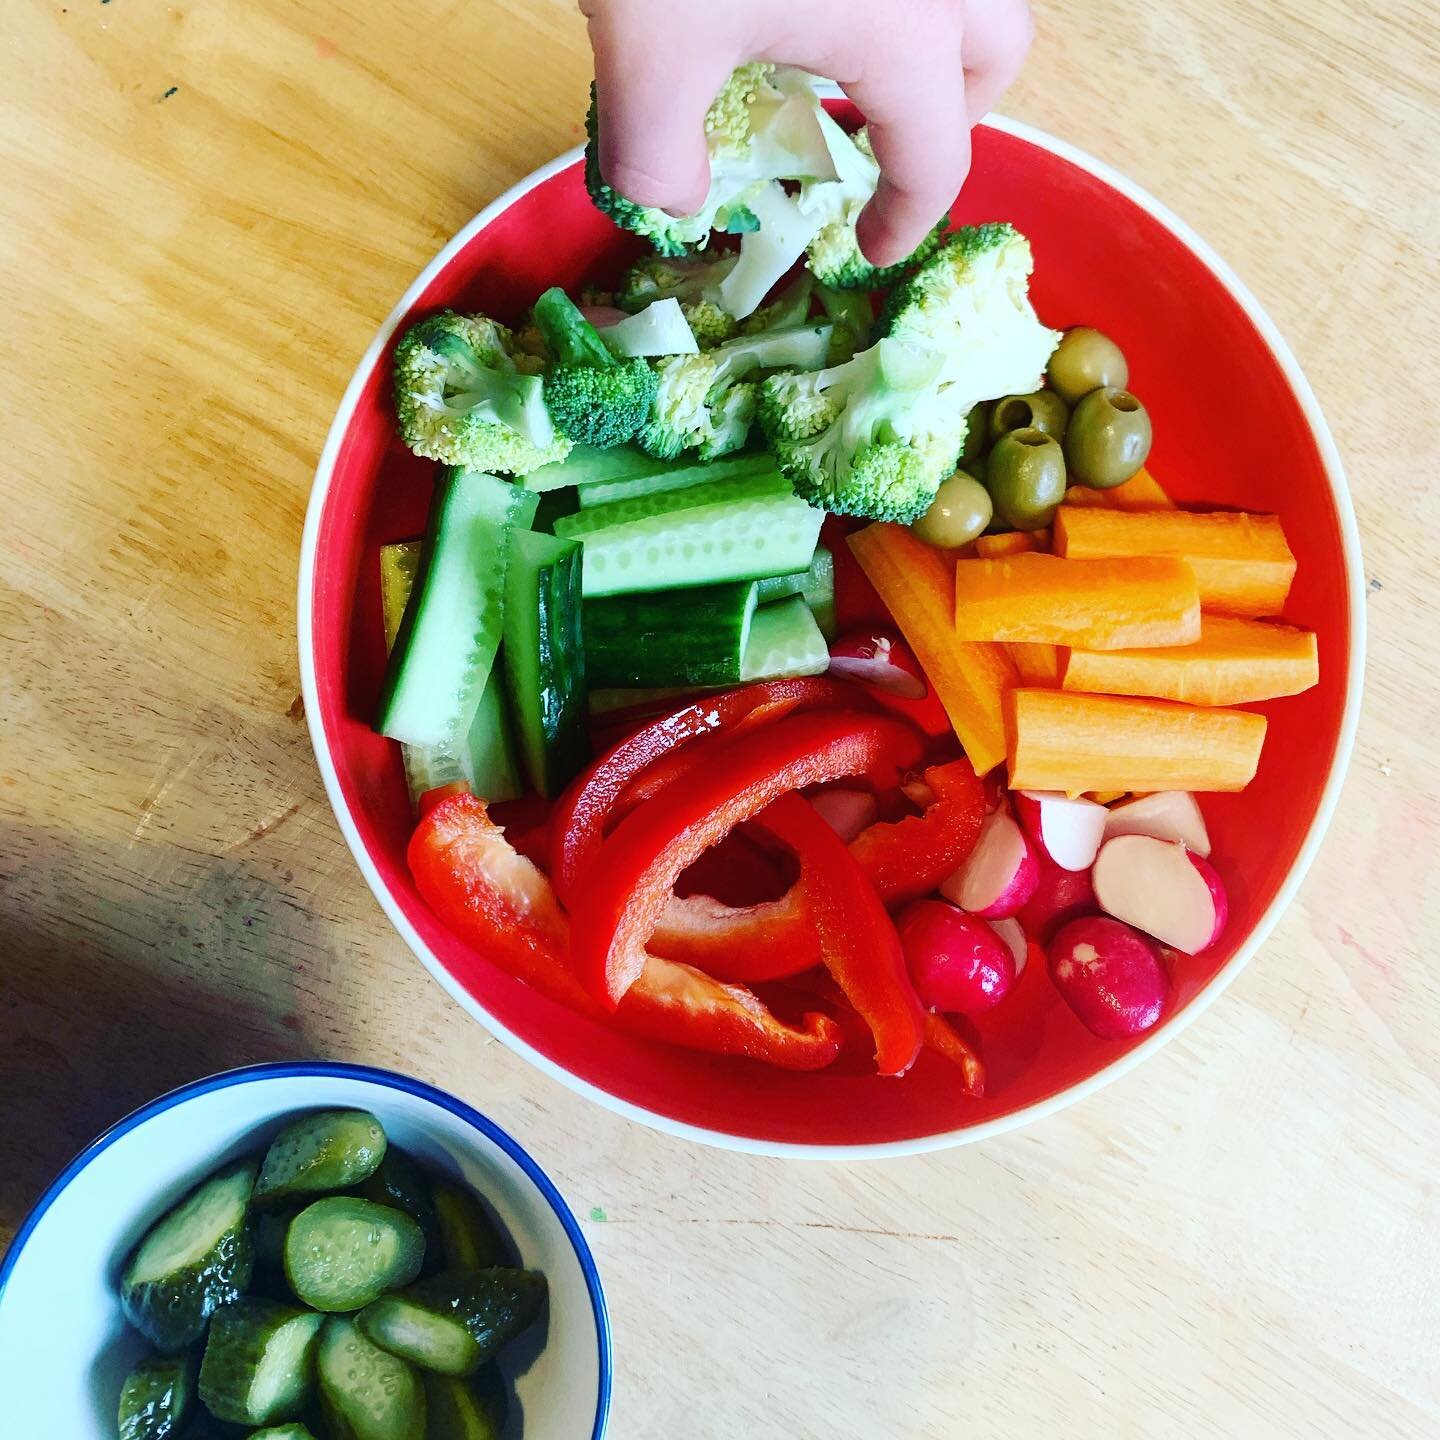 We&rsquo;re having leftover bolognese for lunch but the kids were starving at 11.45 so I gave them this bowl of chopped vegetables with olives and gherkins. An hour or so before a meal is a great time to stock up on veggies- they always eat loads bec